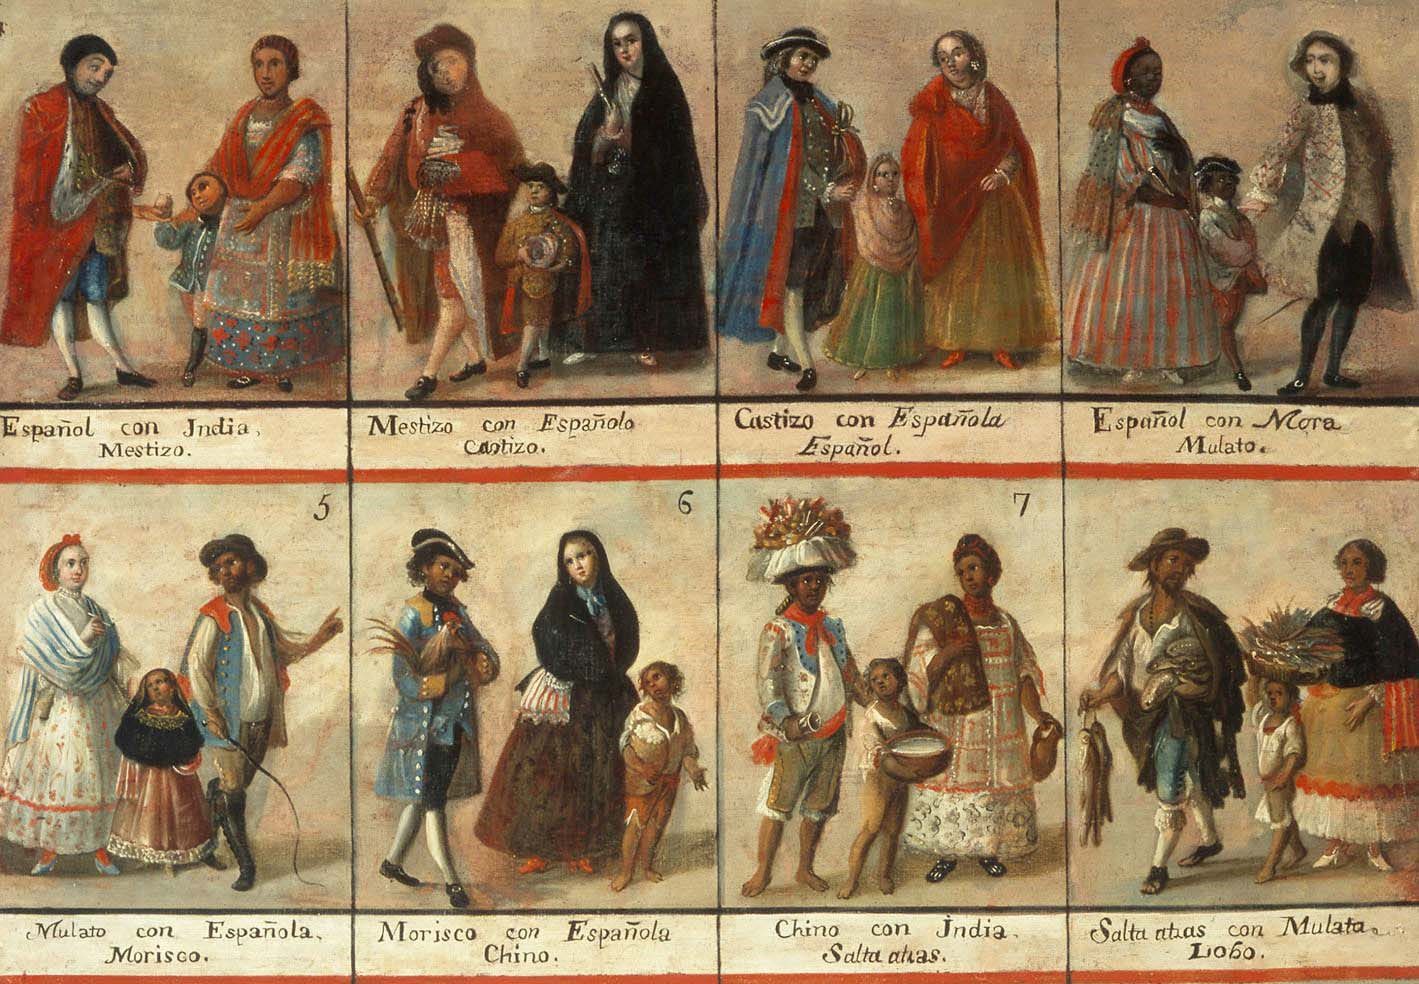 Miguel Cabrera's "Casta" paintings, created in 1763, are significant works of art that shed light on Mexico's colonial past. Prior to the Revolution, much of the art produced in Mexico was designed to reinforce colonialism and the discriminatory caste system. The "Casta" paintings, however, depict mixed-race families and their social status, challenging the prevailing notions of race and hierarchy in Mexican society. (Credit: The Schiller Institute)